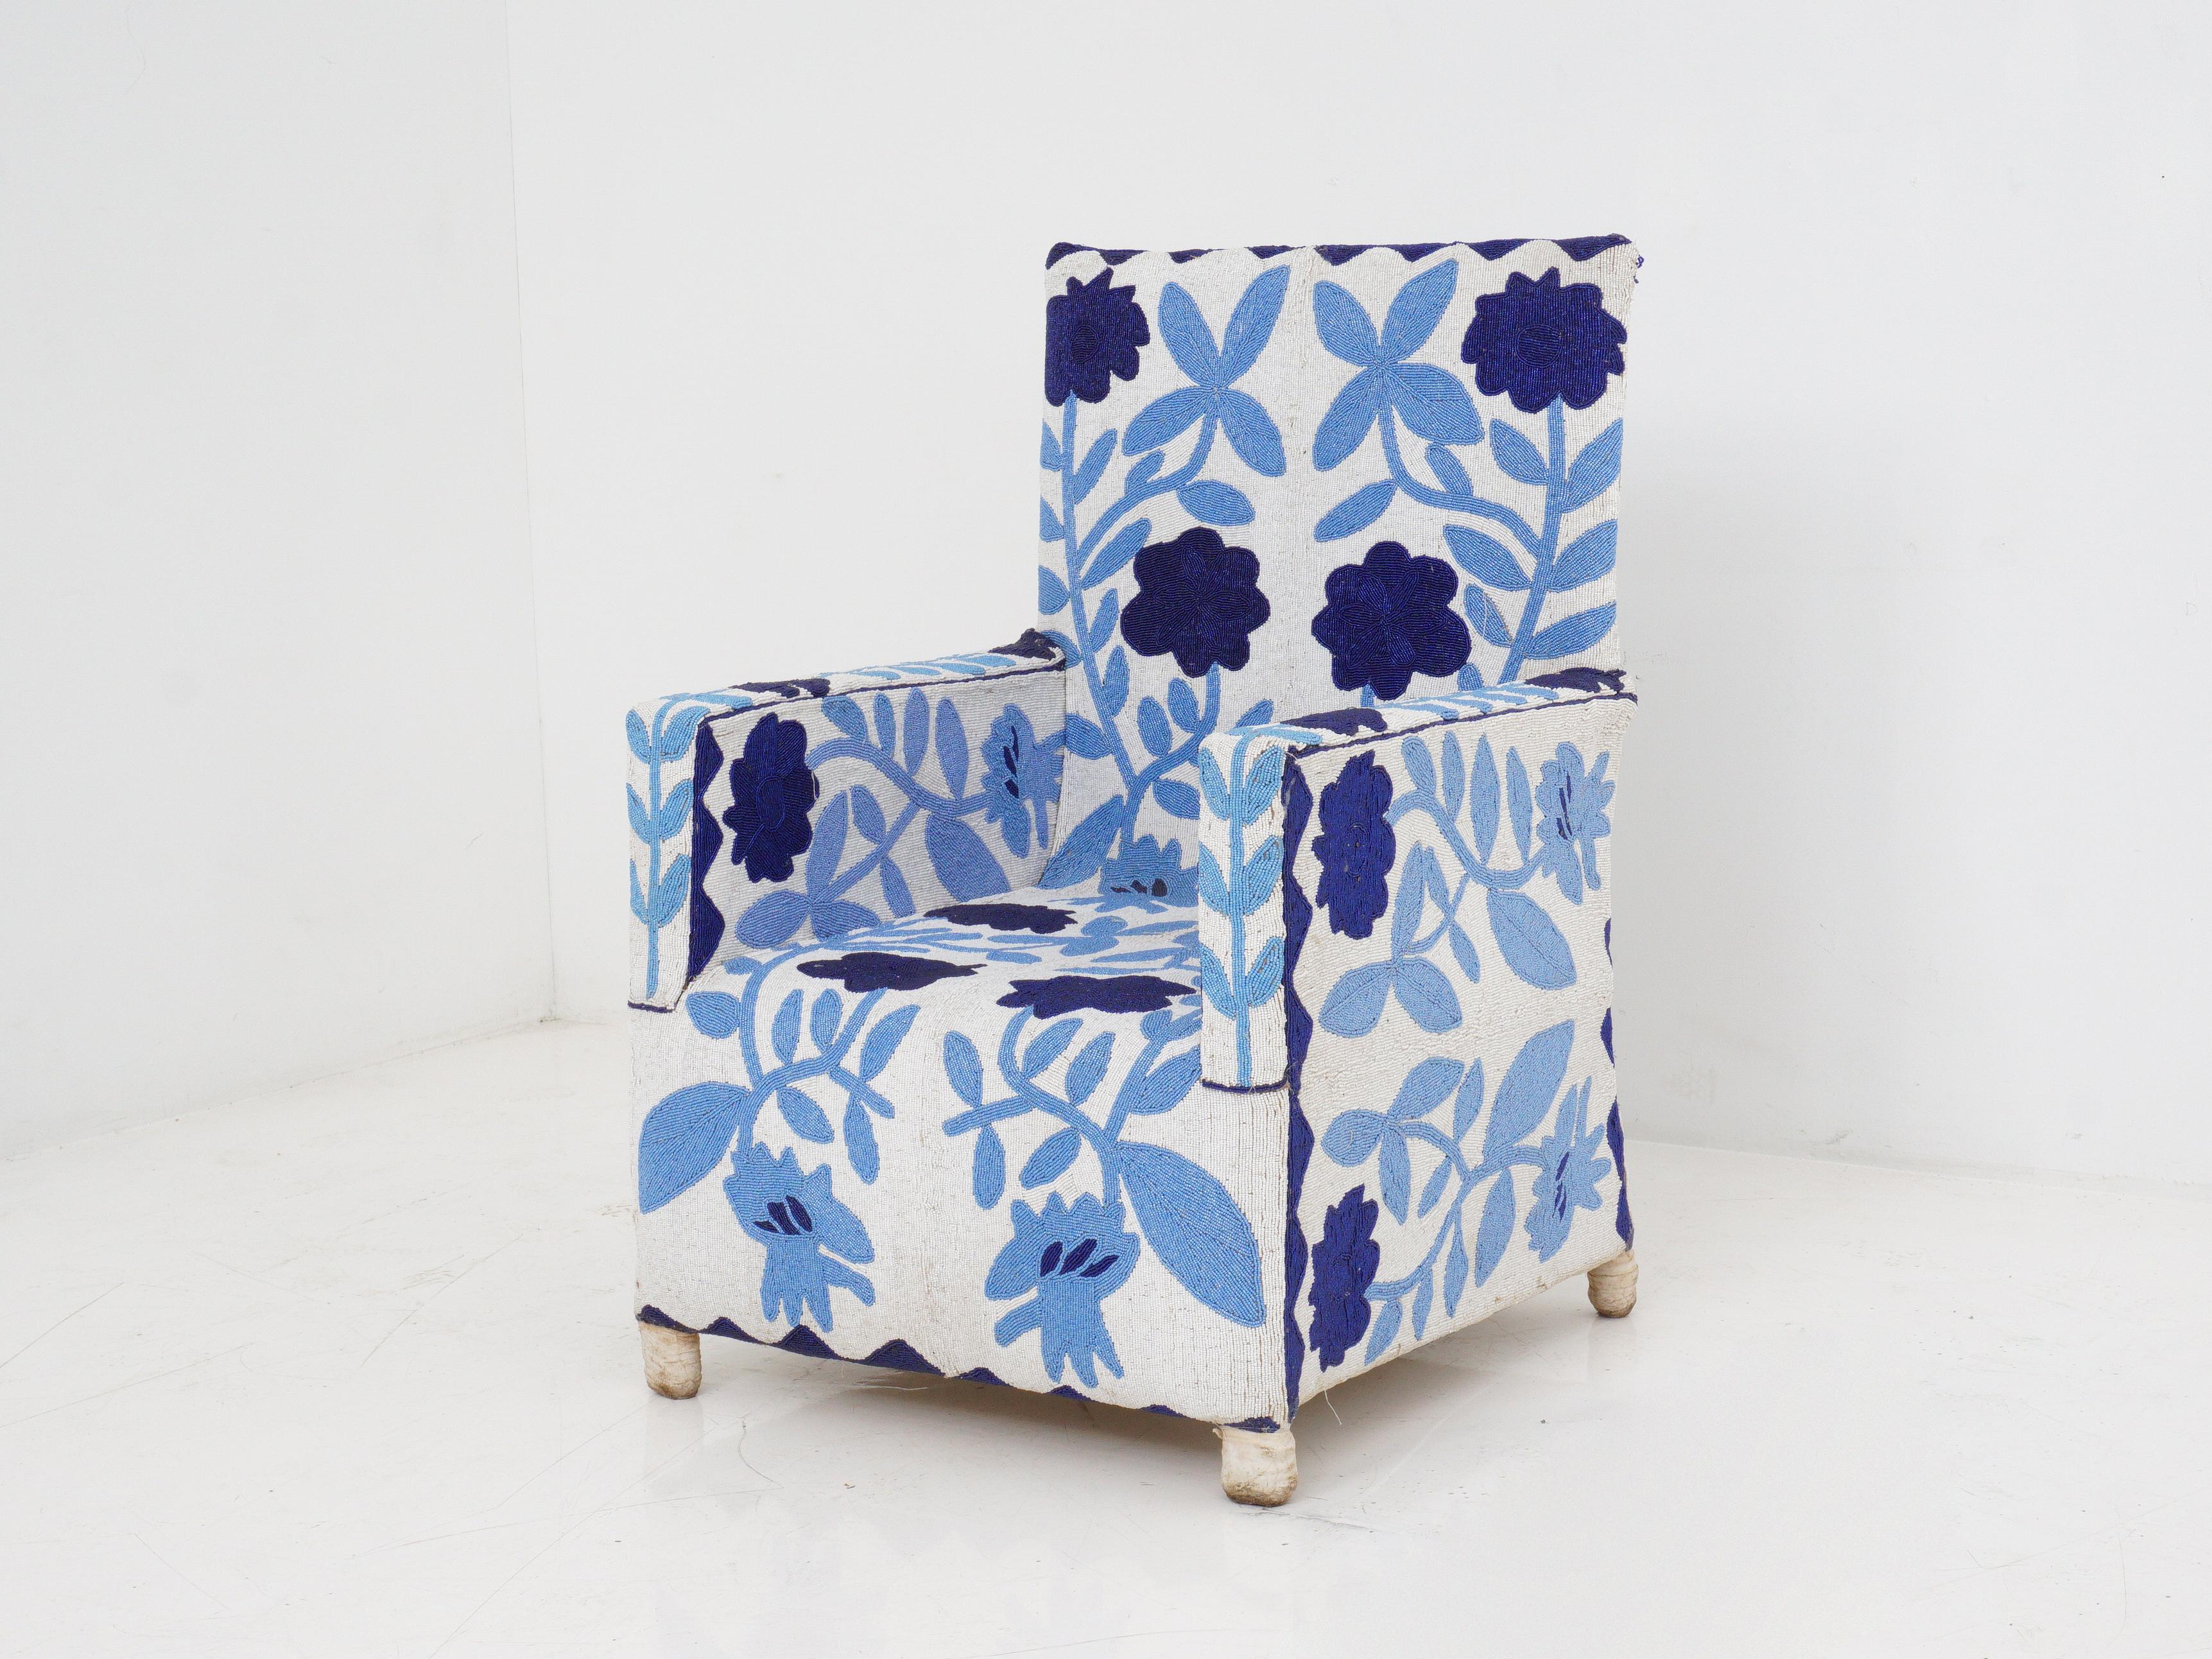 Take a seat in a masterpiece of Yoruba craftsmanship with this captivating hand-beaded chair, adorned in a mesmerizing white and blue design that adds a touch of artistry to any space.

Yoruba chairs have a rich history rooted in the cultural